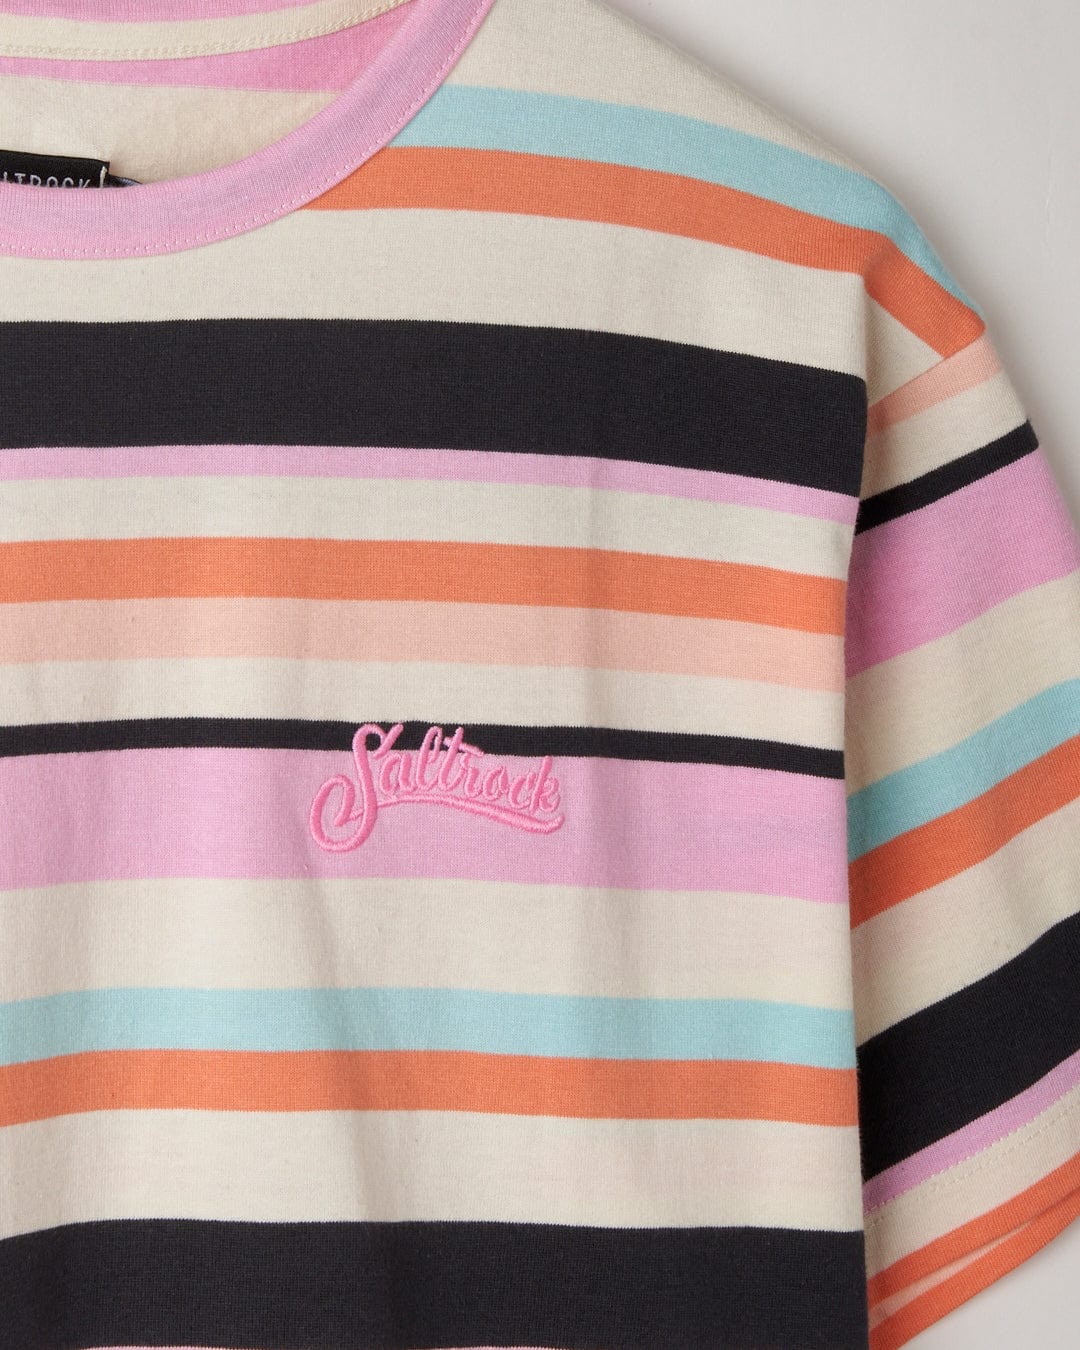 Close-up of a striped cotton Juno - Womens Short Sleeve T-Shirt - Multi with the brand 'Saltrock' embroidered on it.